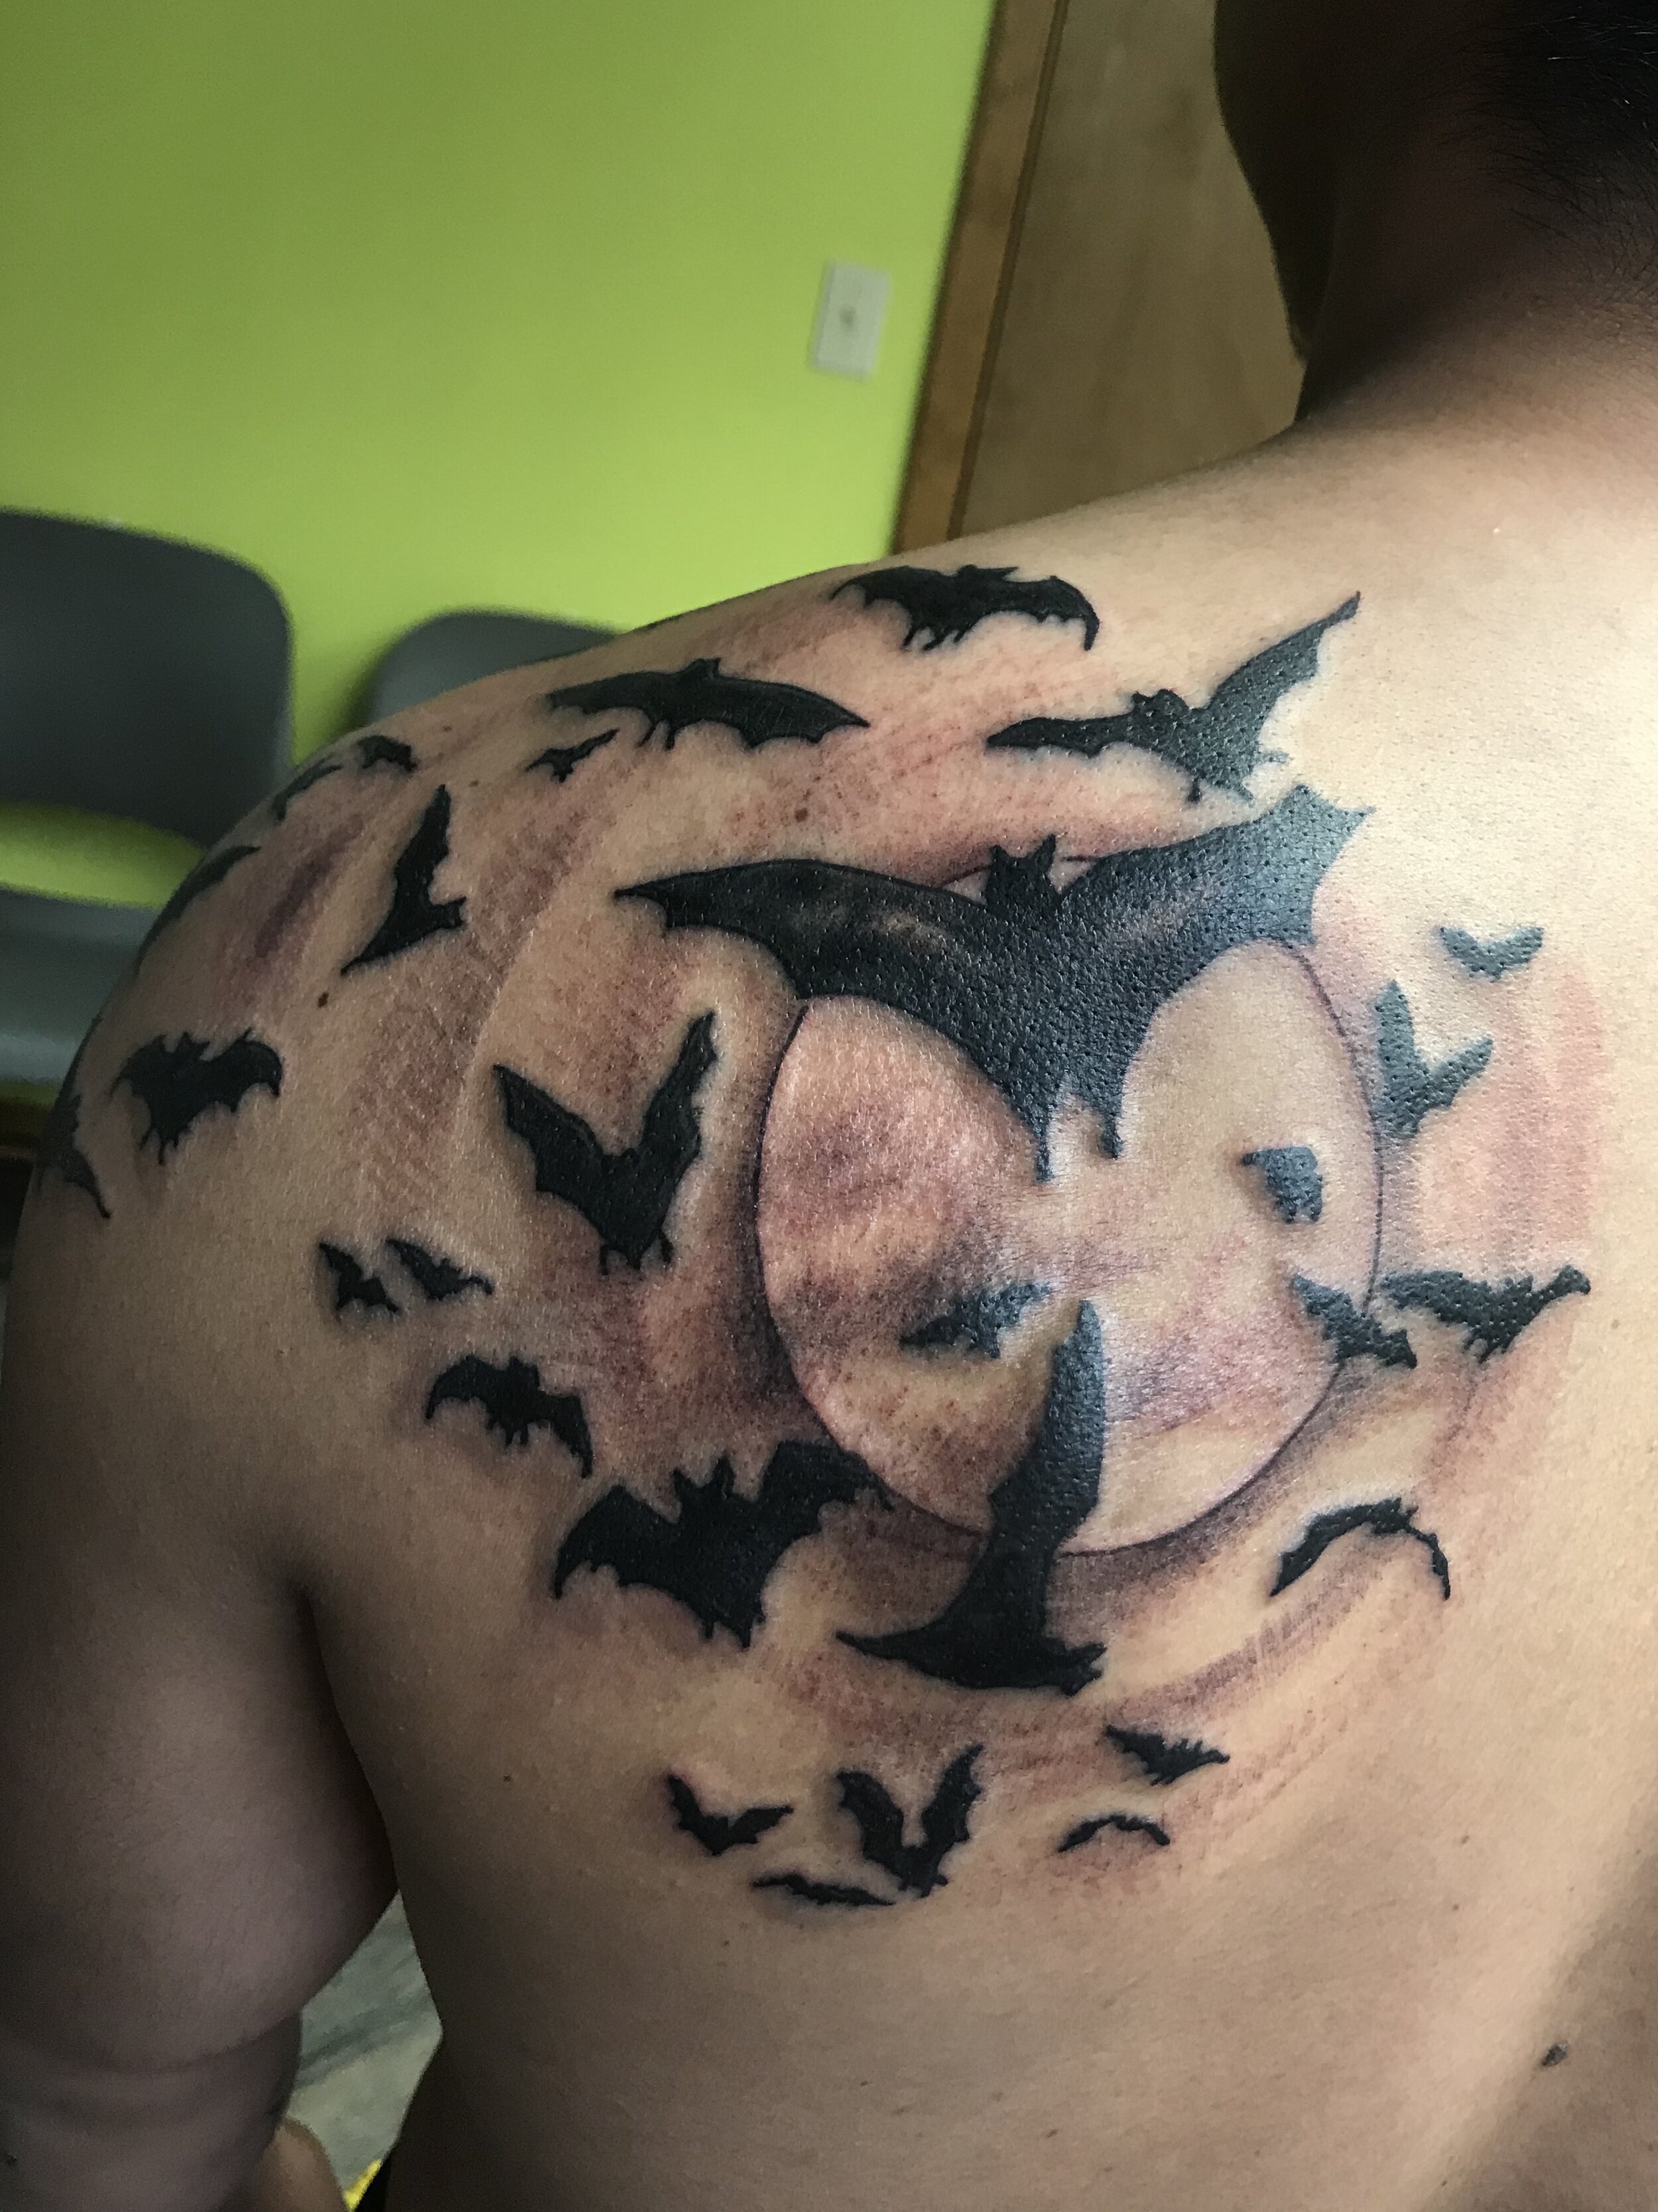 Tattoo tagged with bats blackw chest dots moon witch  inkedappcom